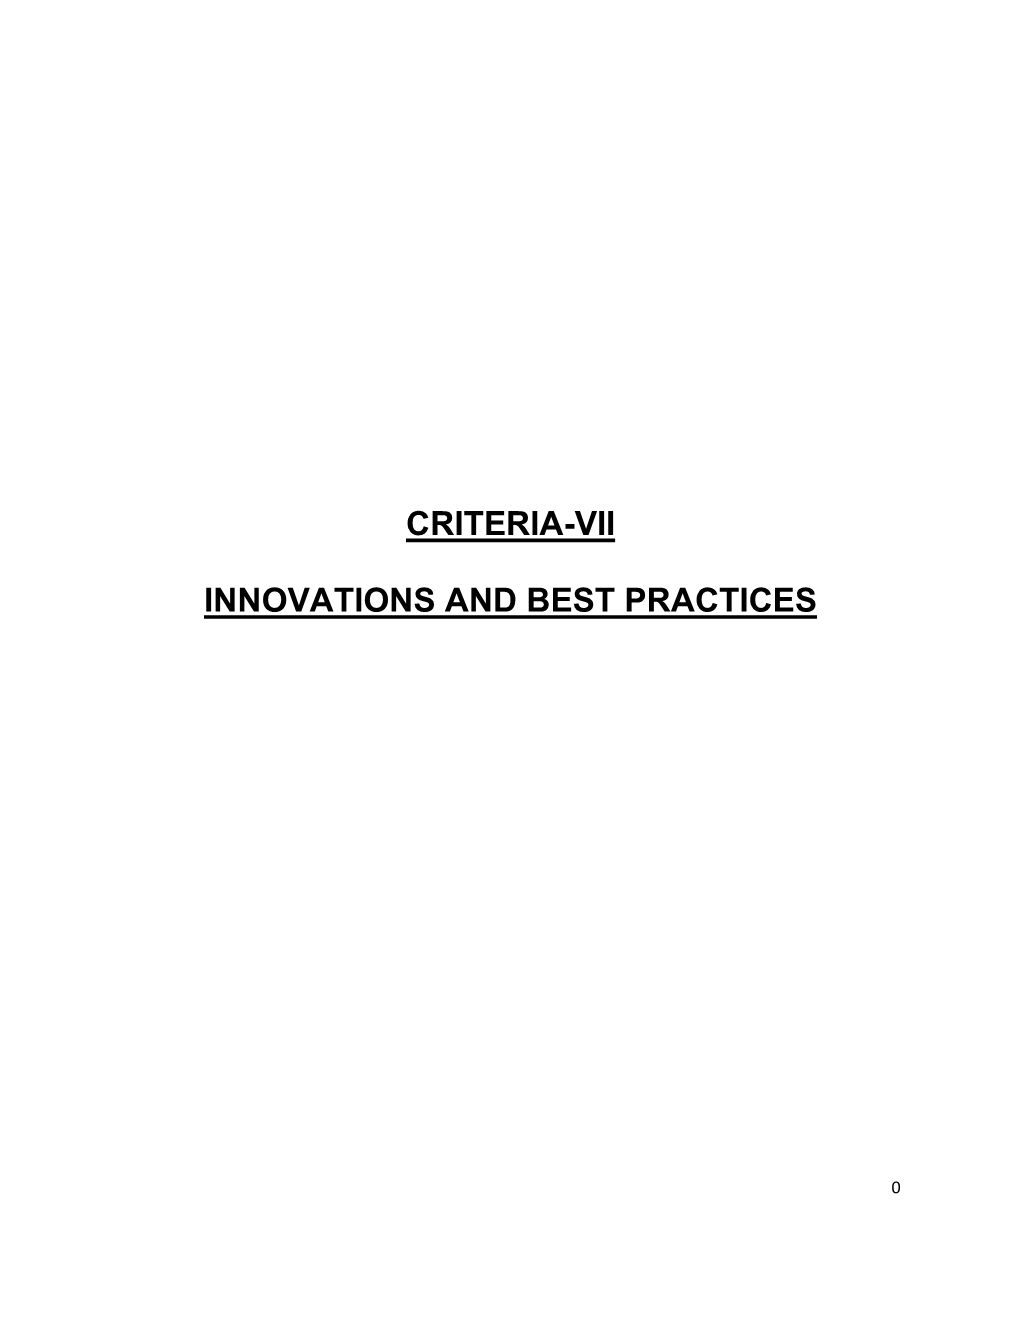 Criteria-Vii Innovations and Best Practices